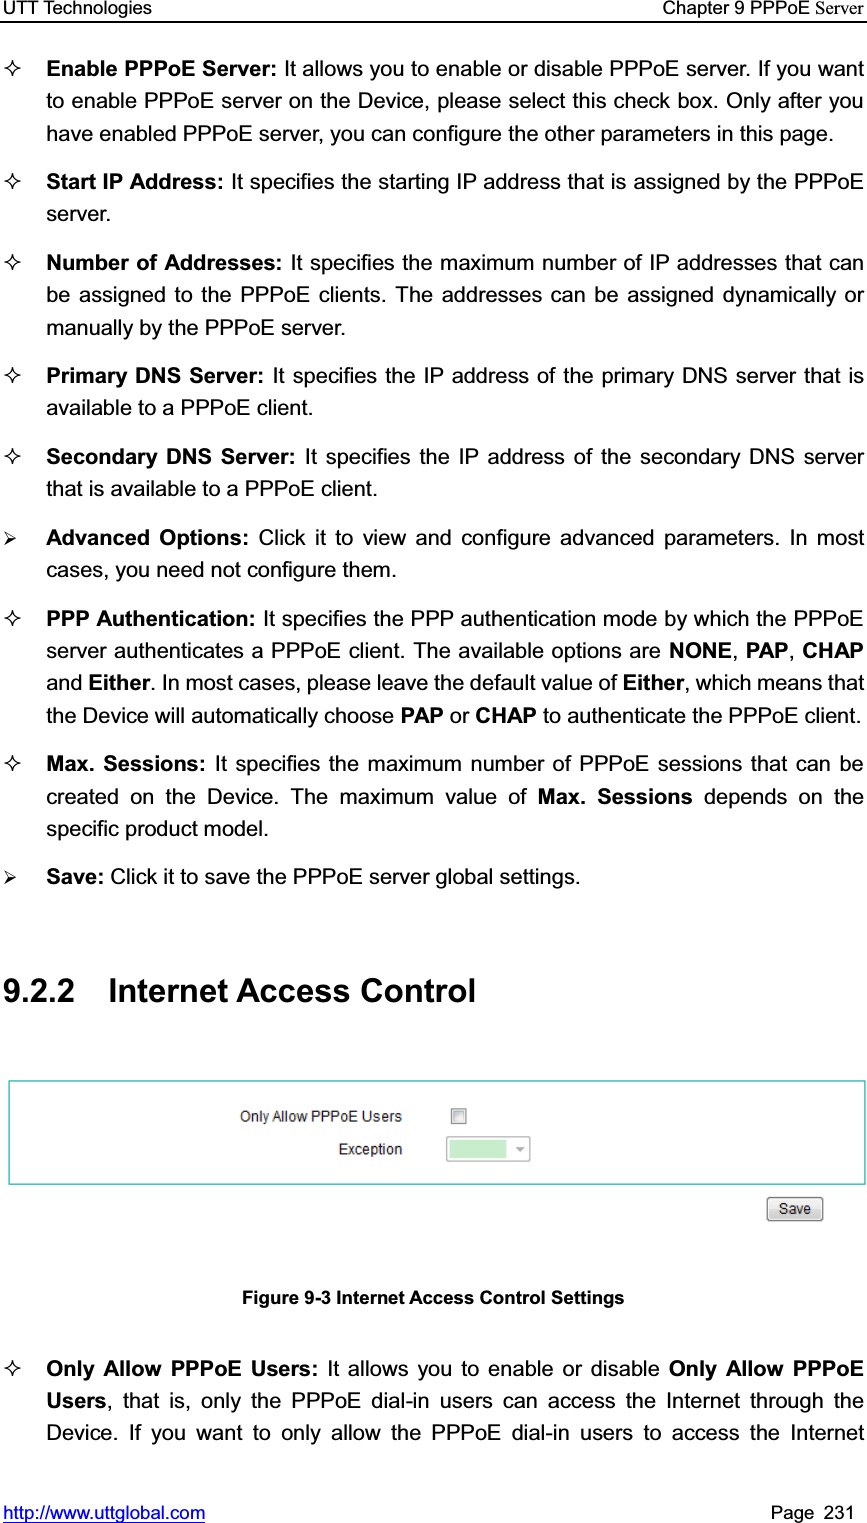 UTT Technologies    Chapter 9 PPPoE Serverhttp://www.uttglobal.com Page 231 Enable PPPoE Server: It allows you to enable or disable PPPoE server. If you want to enable PPPoE server on the Device, please select this check box. Only after you have enabled PPPoE server, you can configure the other parameters in this page. Start IP Address: It specifies the starting IP address that is assigned by the PPPoE server.  Number of Addresses: It specifies the maximum number of IP addresses that can be assigned to the PPPoE clients. The addresses can be assigned dynamically or manually by the PPPoE server. Primary DNS Server: It specifies the IP address of the primary DNS server that is available to a PPPoE client. Secondary DNS Server: It specifies the IP address of the secondary DNS server that is available to a PPPoE client.¾Advanced Options: Click it to view and configure advanced parameters. In most cases, you need not configure them. PPP Authentication: It specifies the PPP authentication mode by which the PPPoE server authenticates a PPPoE client. The available options are NONE,PAP,CHAPand Either. In most cases, please leave the default value of Either, which means that the Device will automatically choose PAP or CHAP to authenticate the PPPoE client. Max. Sessions: It specifies the maximum number of PPPoE sessions that can be created on the Device. The maximum value of Max. Sessions depends on the specific product model. ¾Save: Click it to save the PPPoE server global settings.9.2.2 Internet Access Control Figure 9-3 Internet Access Control Settings Only Allow PPPoE Users: It allows you to enable or disable Only Allow PPPoE Users, that is, only the PPPoE dial-in users can access the Internet through the Device. If you want to only allow the PPPoE dial-in users to access the Internet 